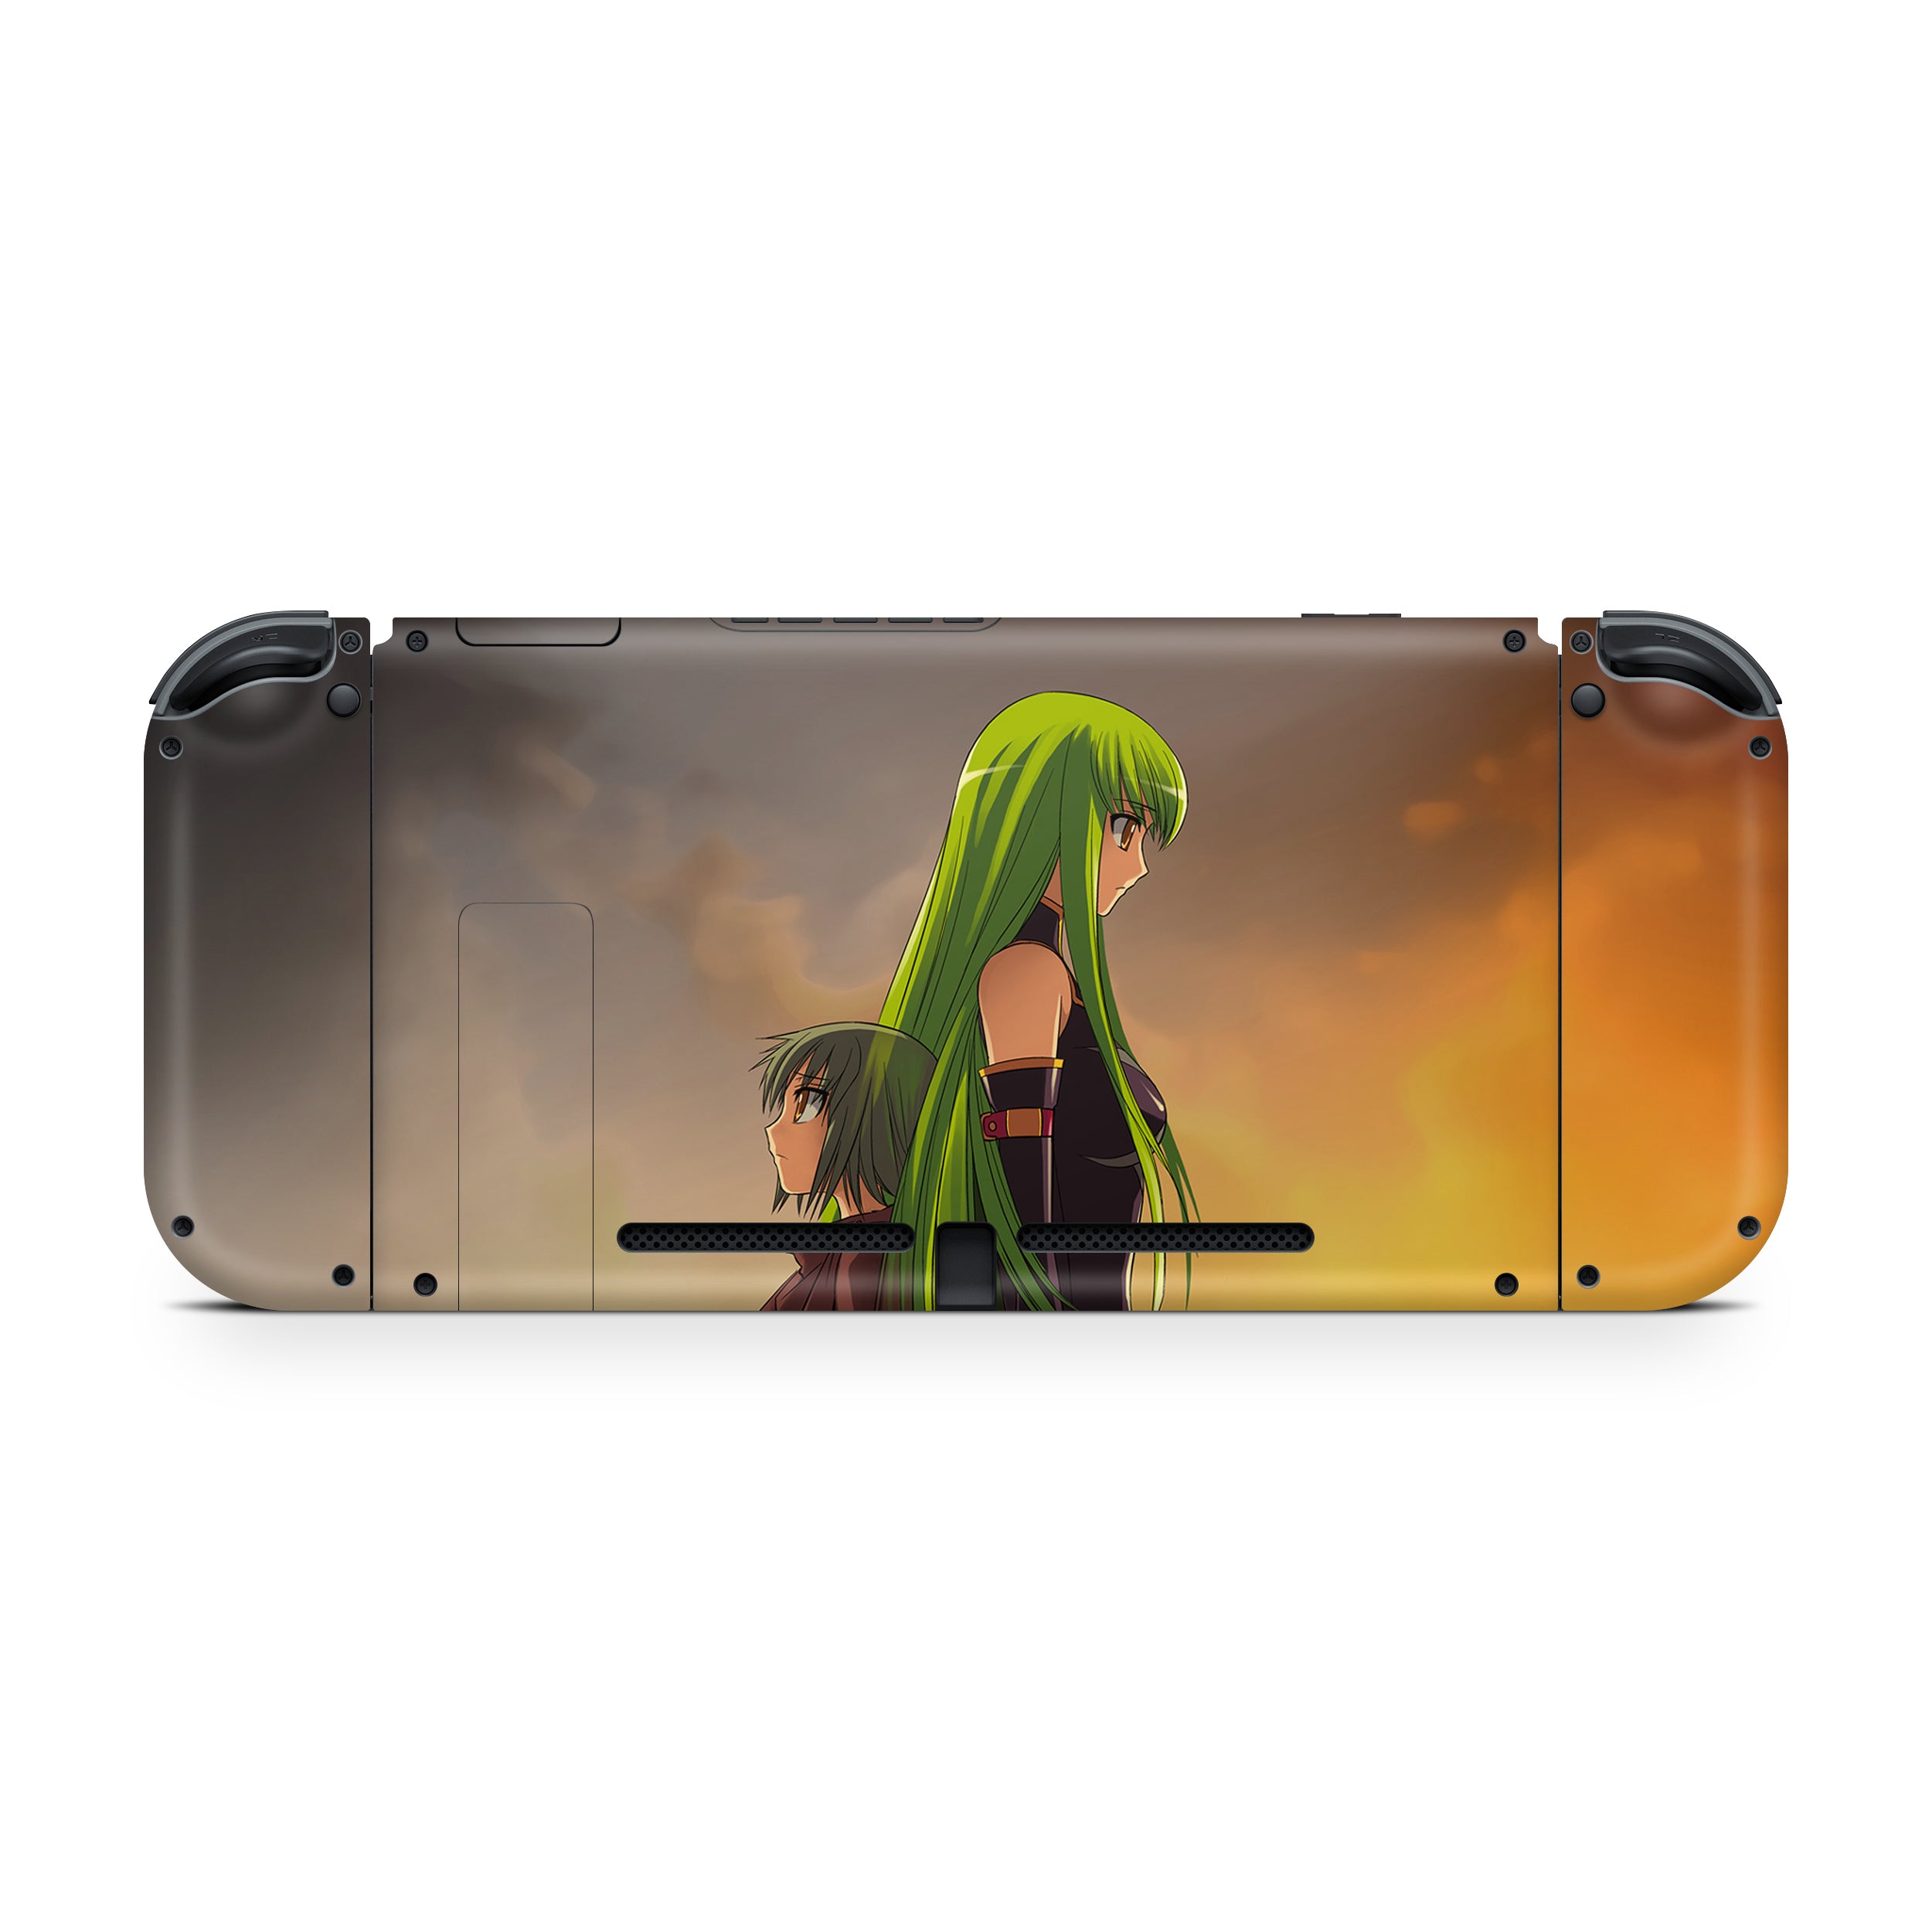 A video game skin featuring a Code Geass CC design for the Nintendo Switch.